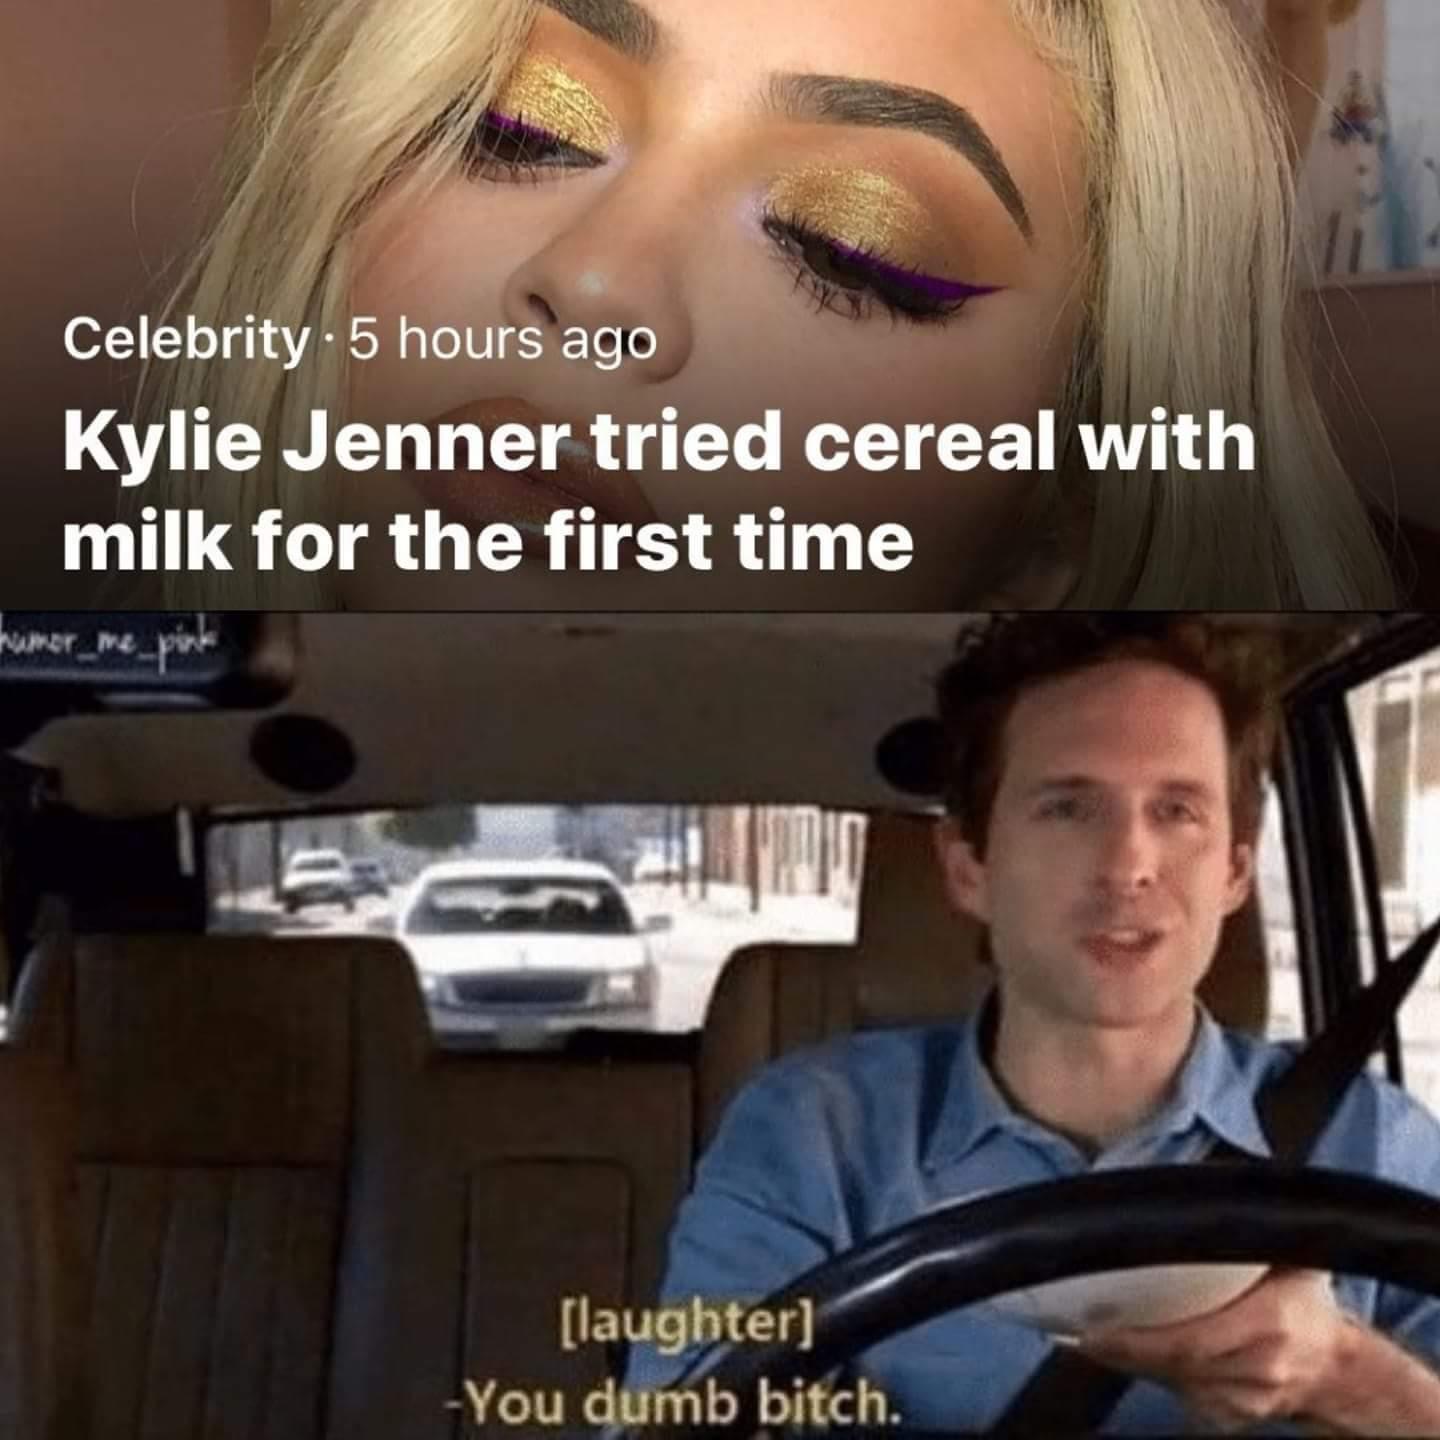 all new memes - Celebrity .5 hours ago Kylie Jenner tried cereal with milk for the first time pink laughter You dumb bitch.